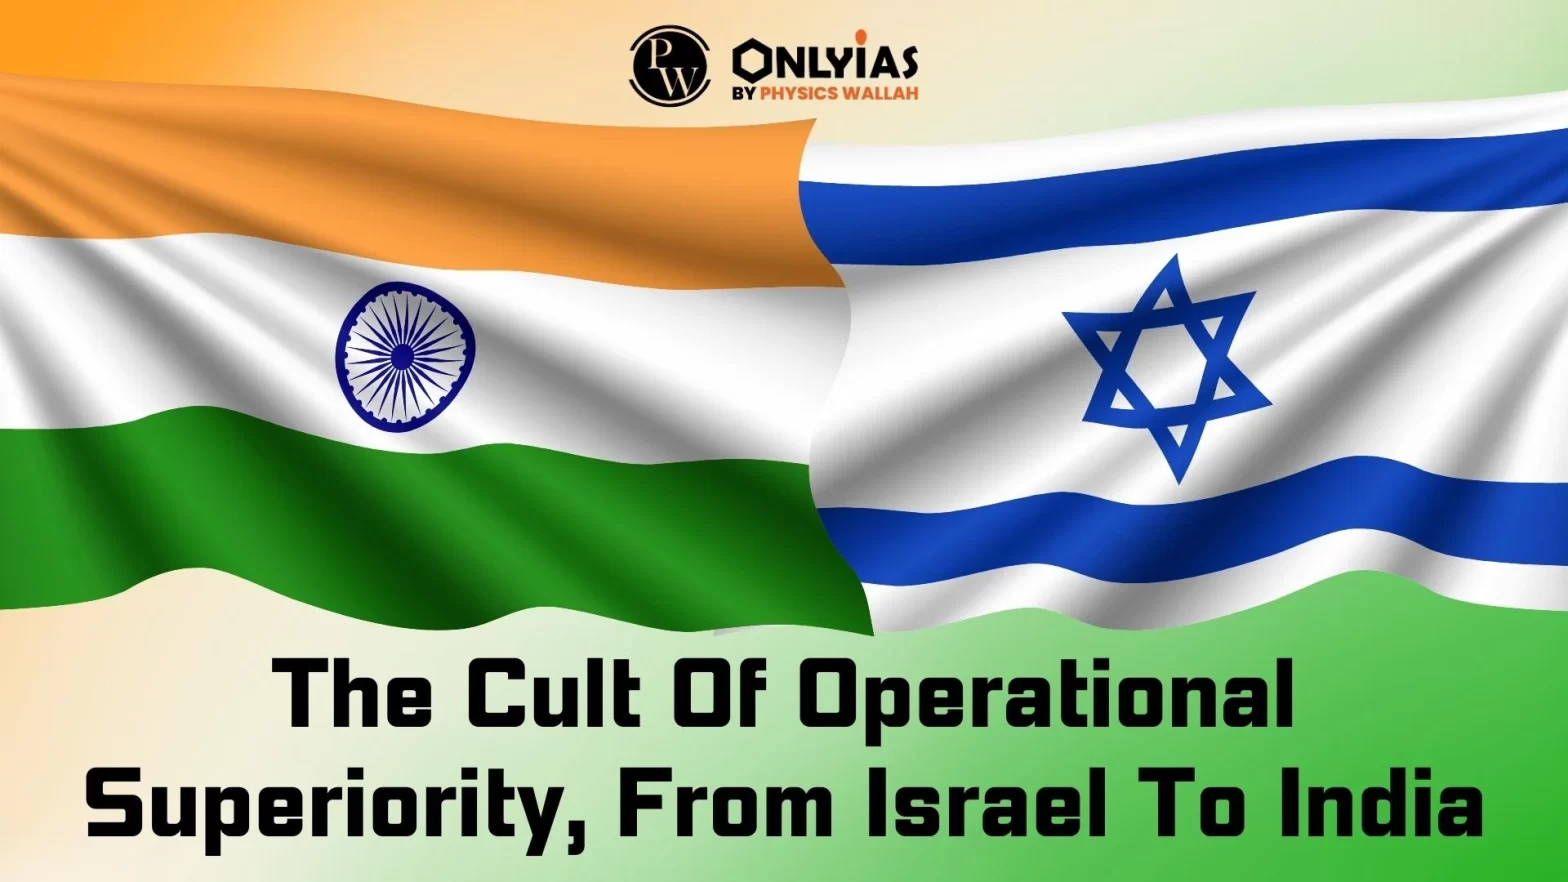 The Cult Of Operational Superiority, From Israel To India